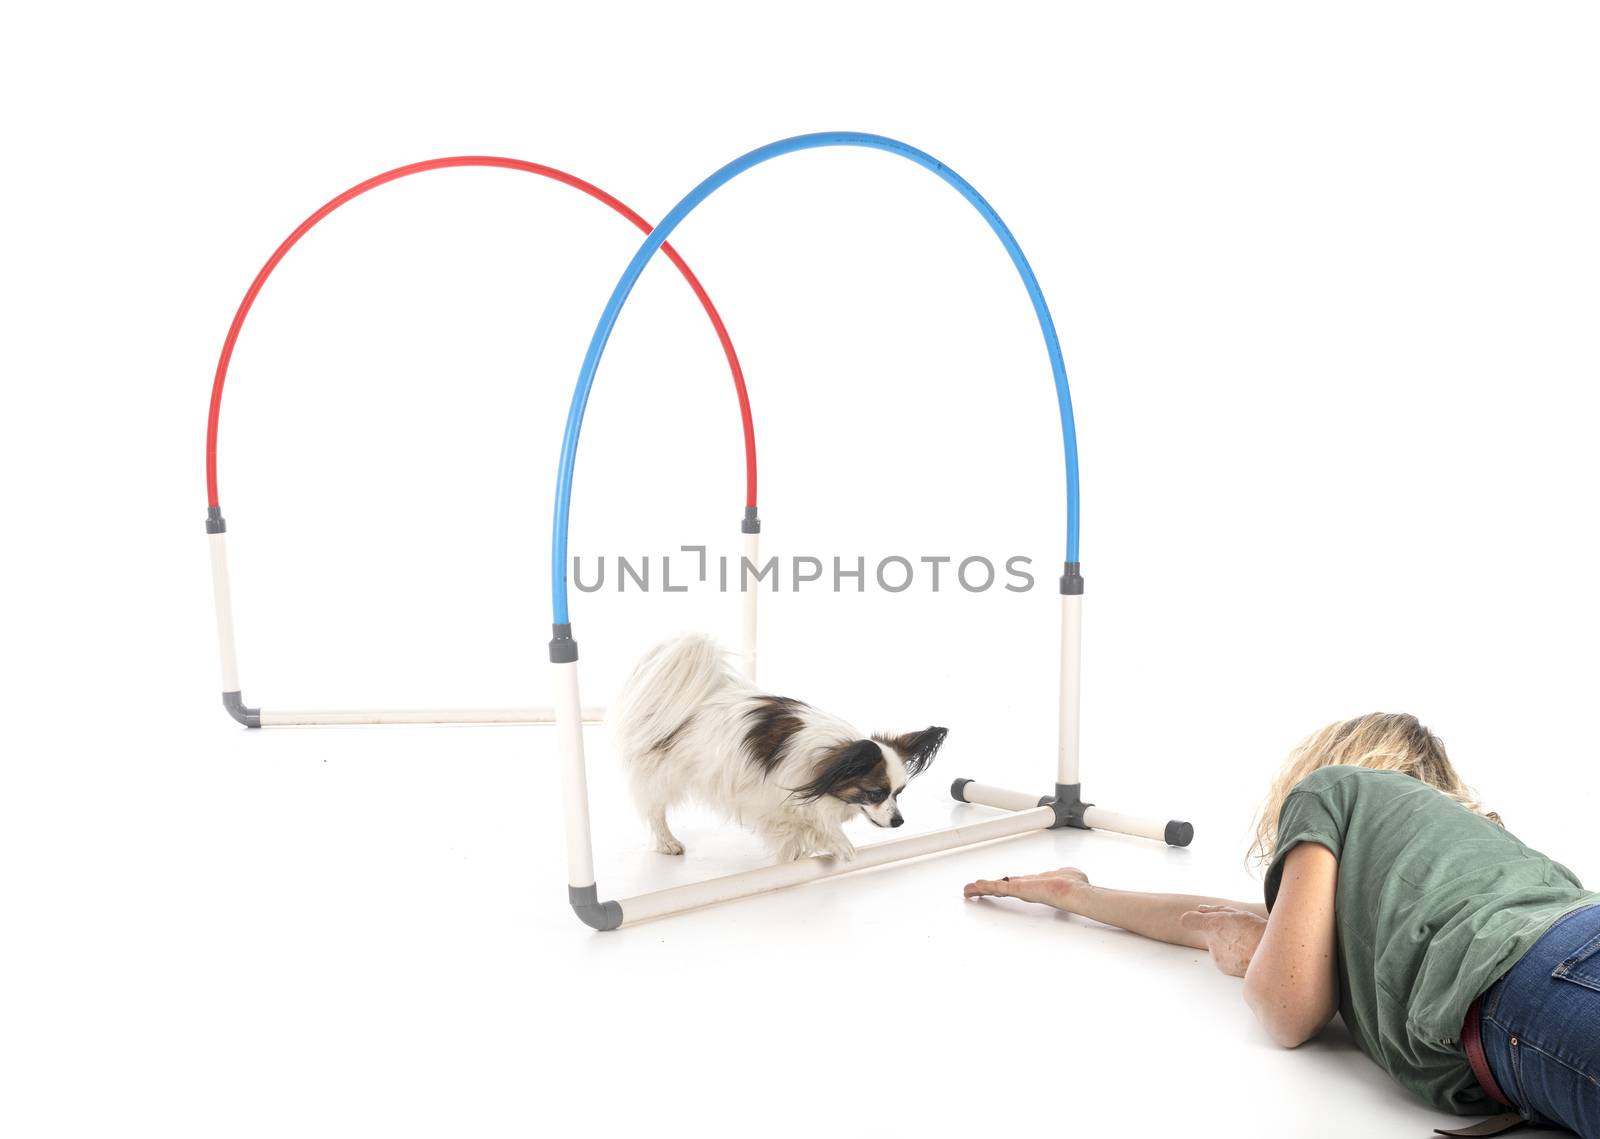 hooper training in front of white background